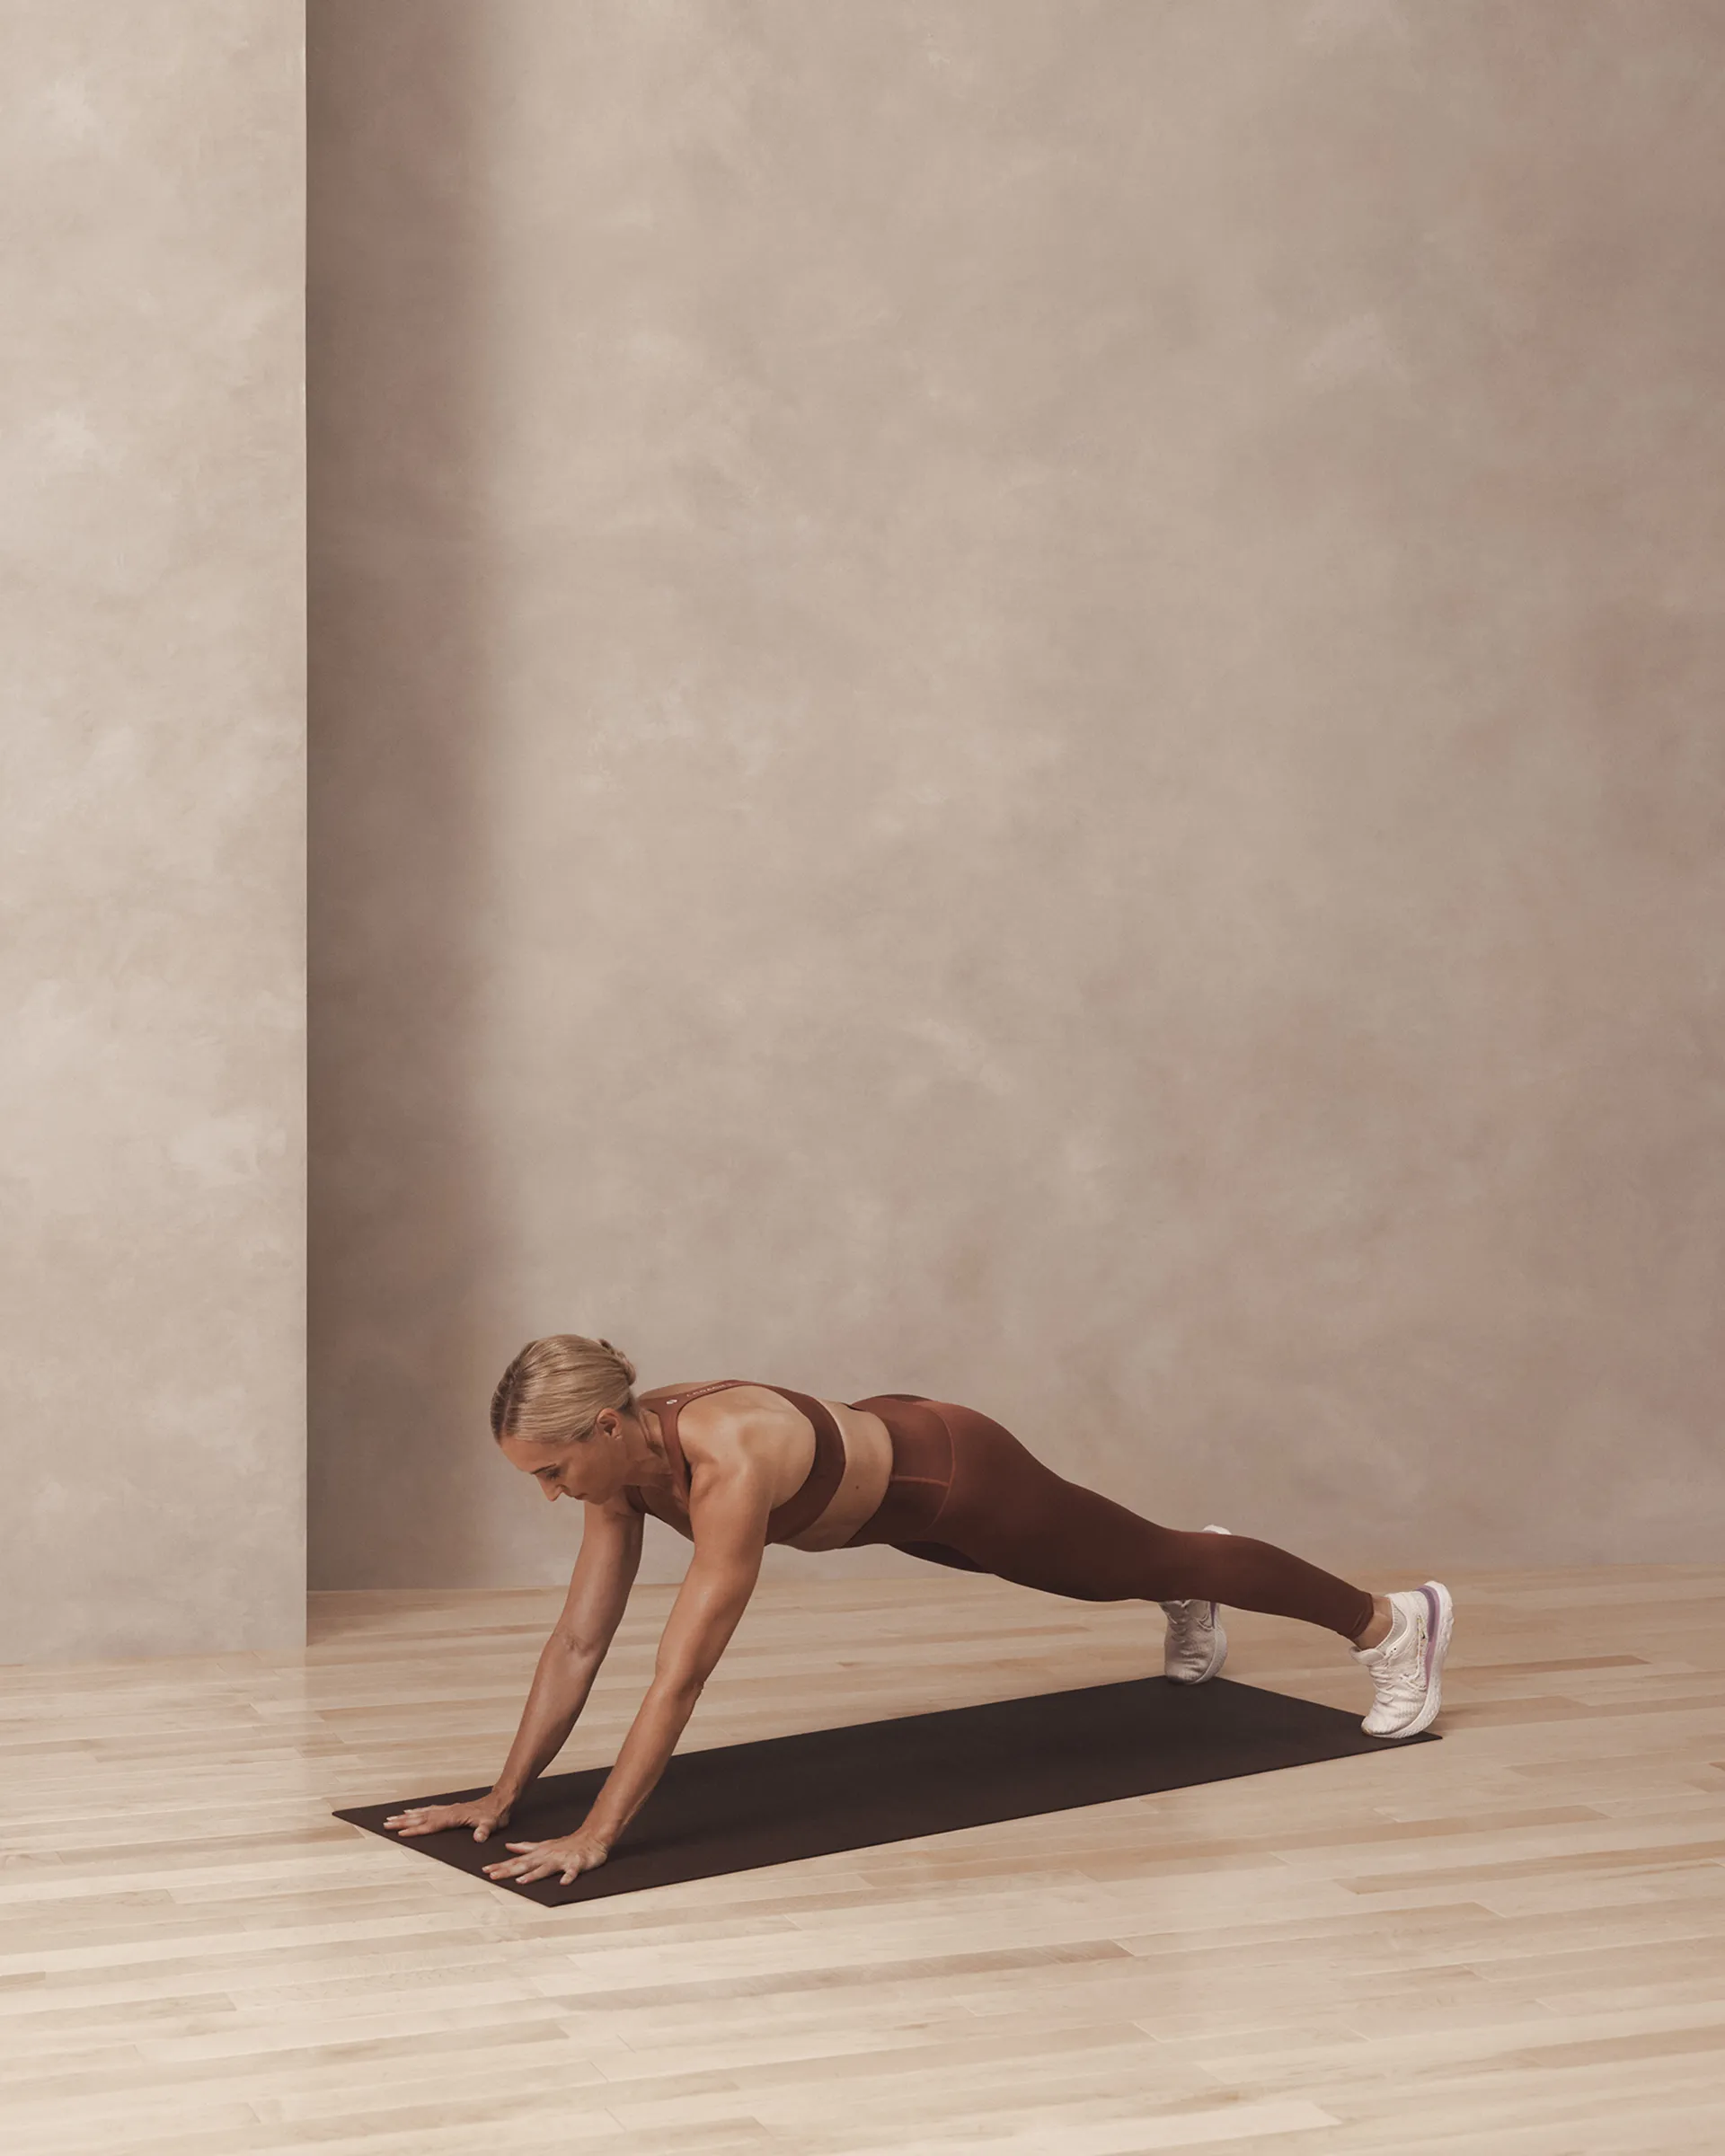 A Life Time member holding a brooklyn plank on a yoga mat.